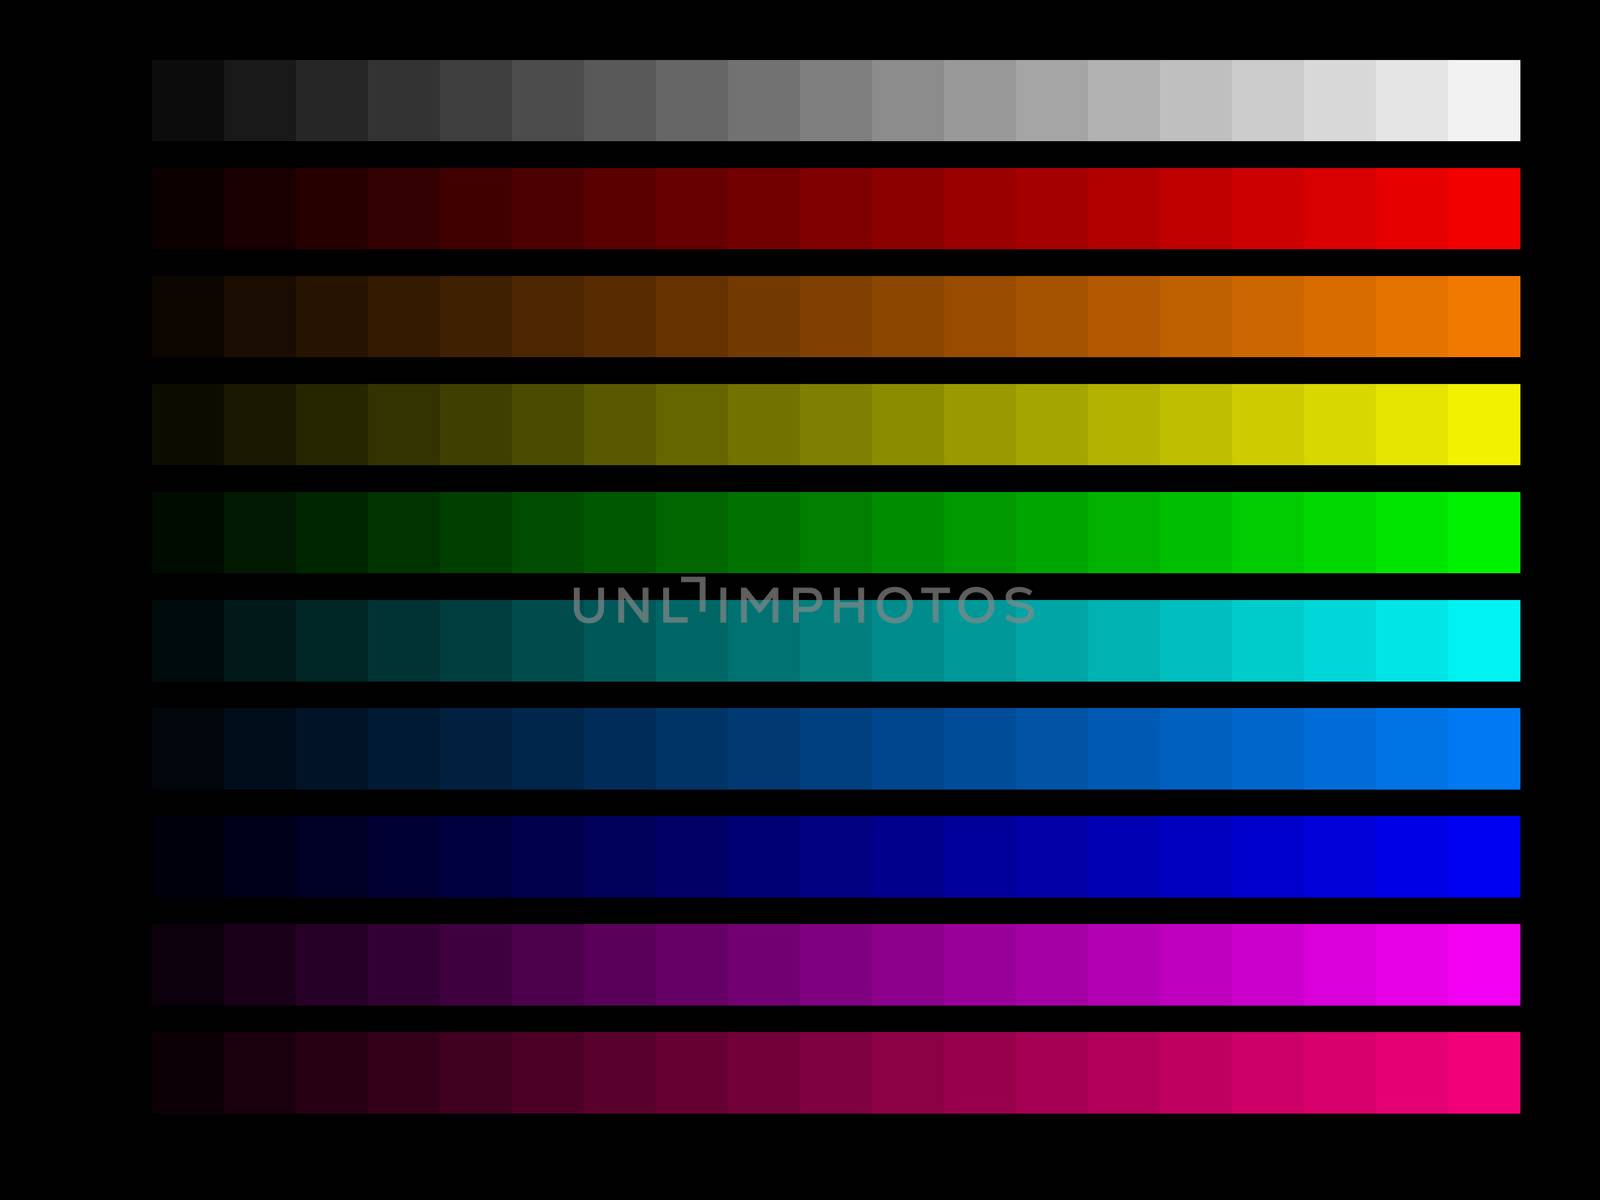 Abstract image in the style of television color test bars - FOR ILLUSTRATION ONLY